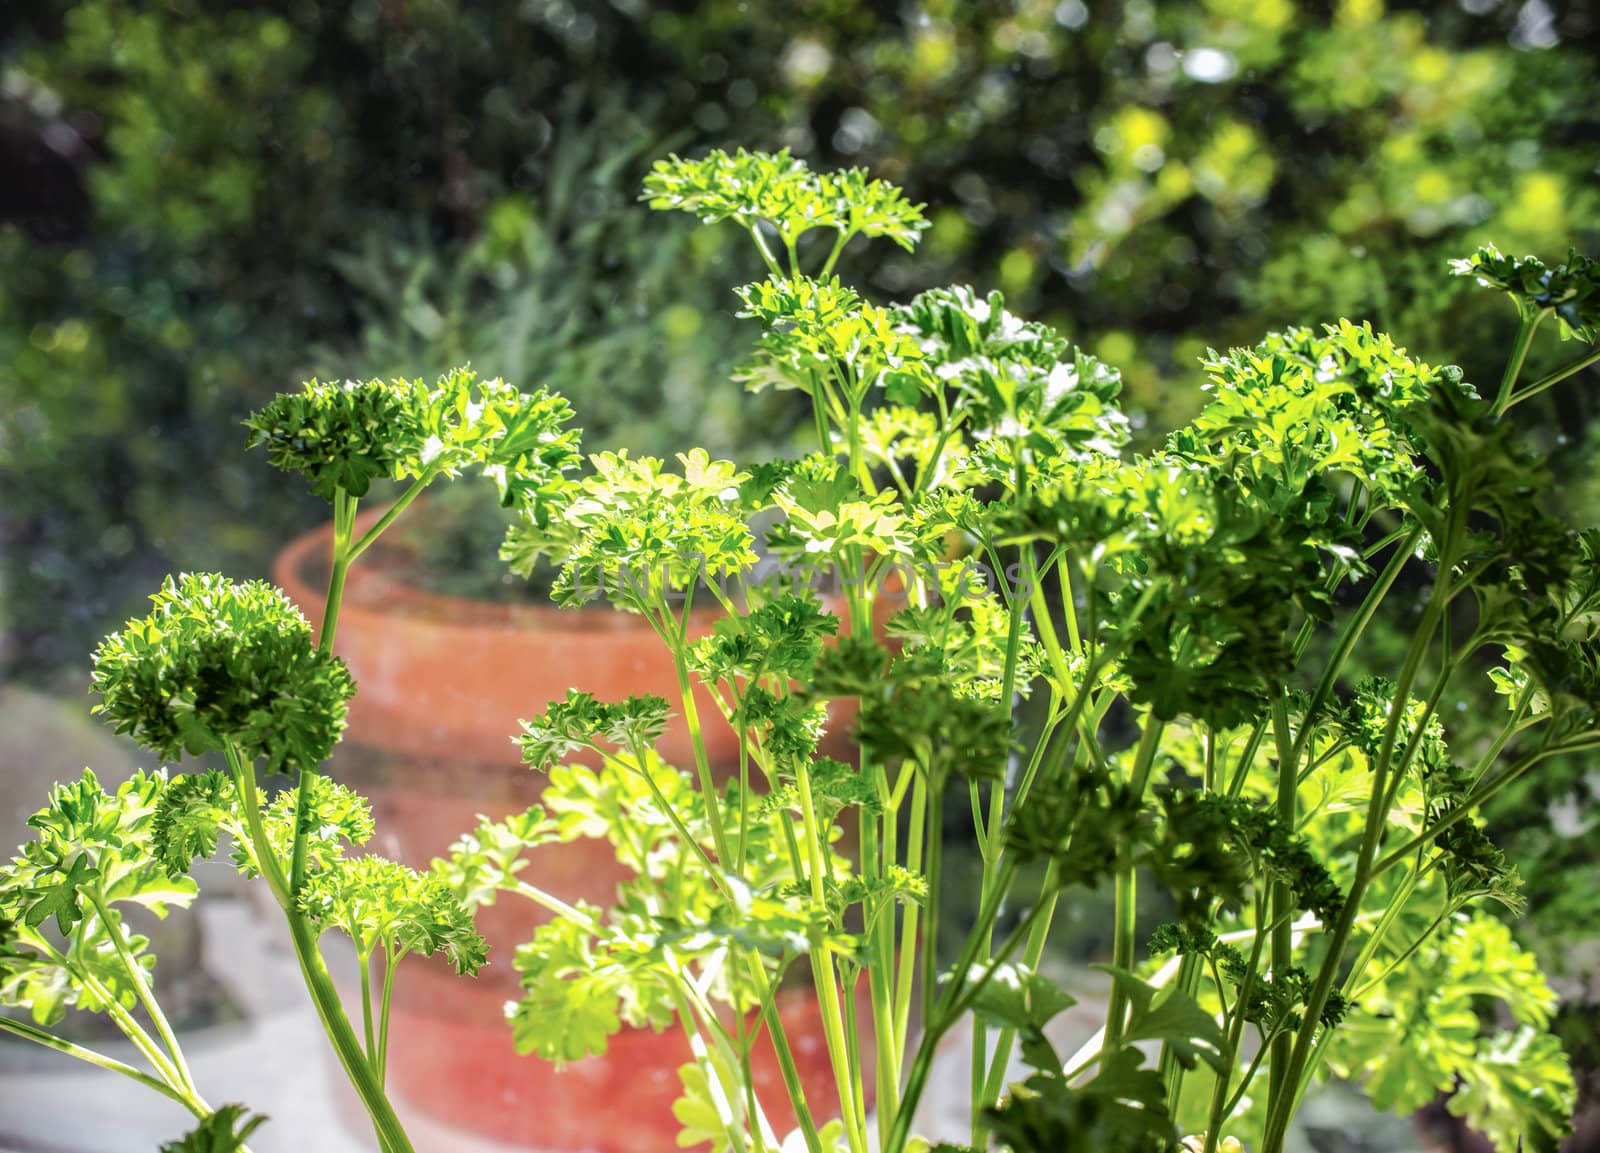 Bright Parsley Plant in Window Pot is Ready to Garnish.